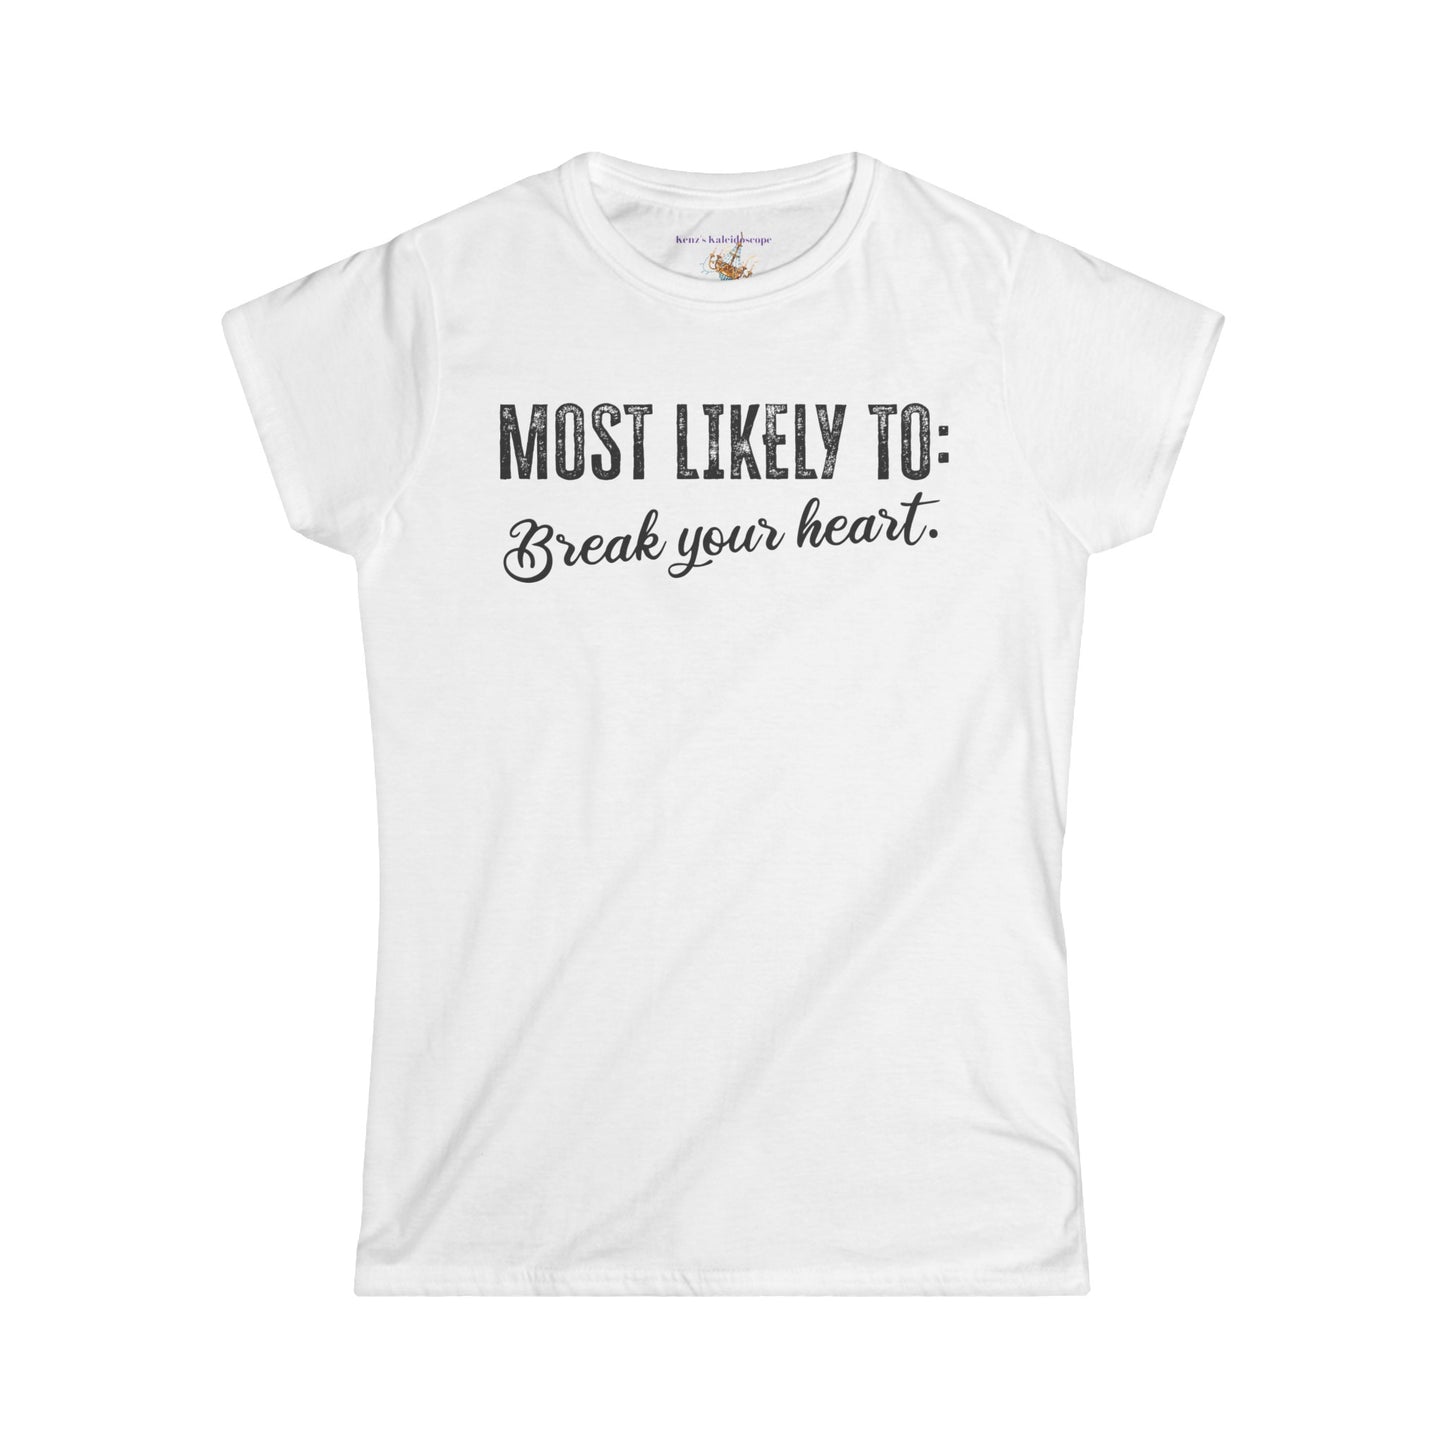 Bachelorette Party Most Likely To, S-2XL, Women's Softstyle Tee